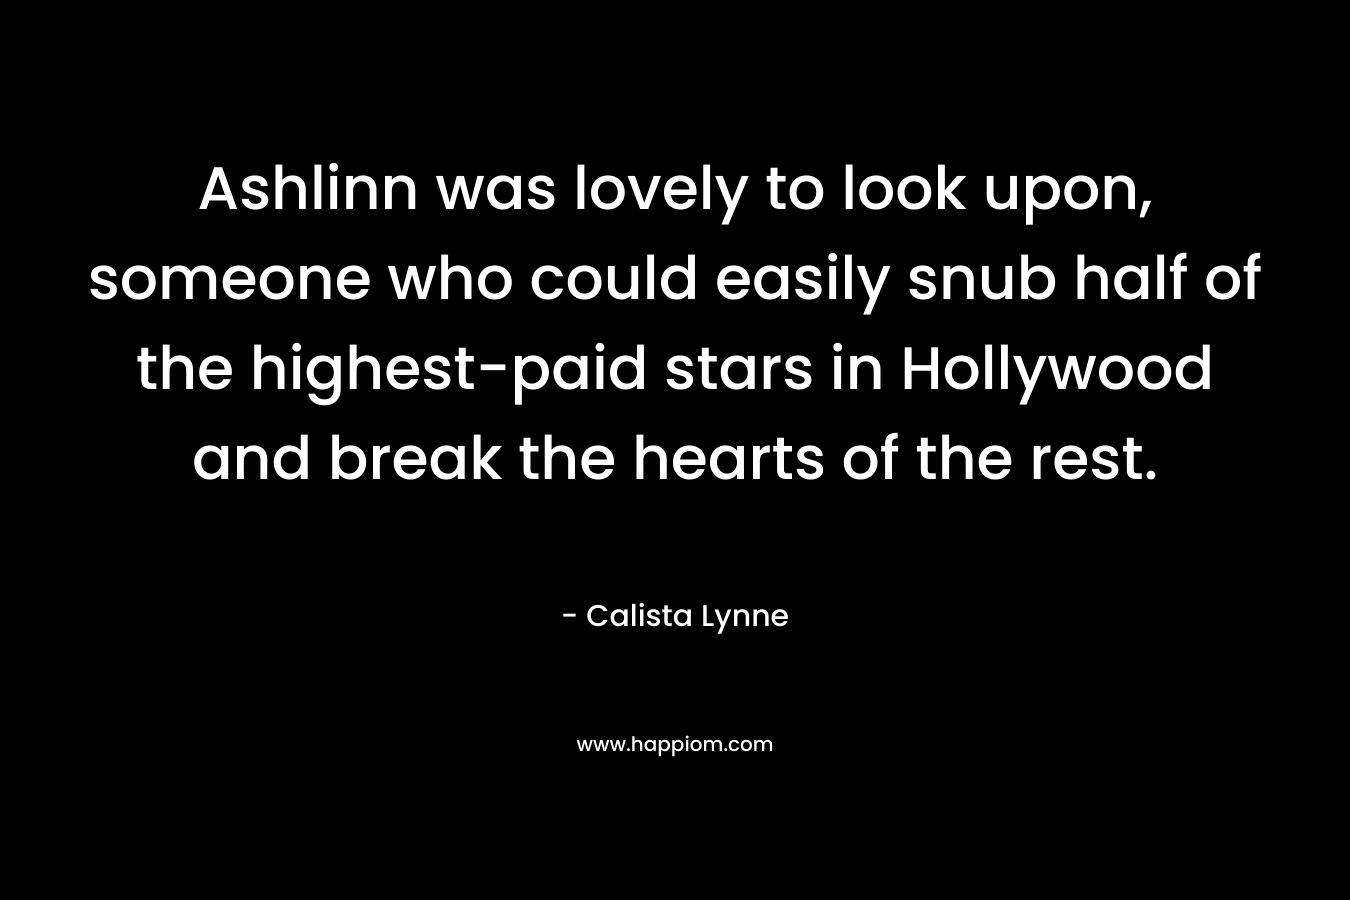 Ashlinn was lovely to look upon, someone who could easily snub half of the highest-paid stars in Hollywood and break the hearts of the rest. – Calista Lynne